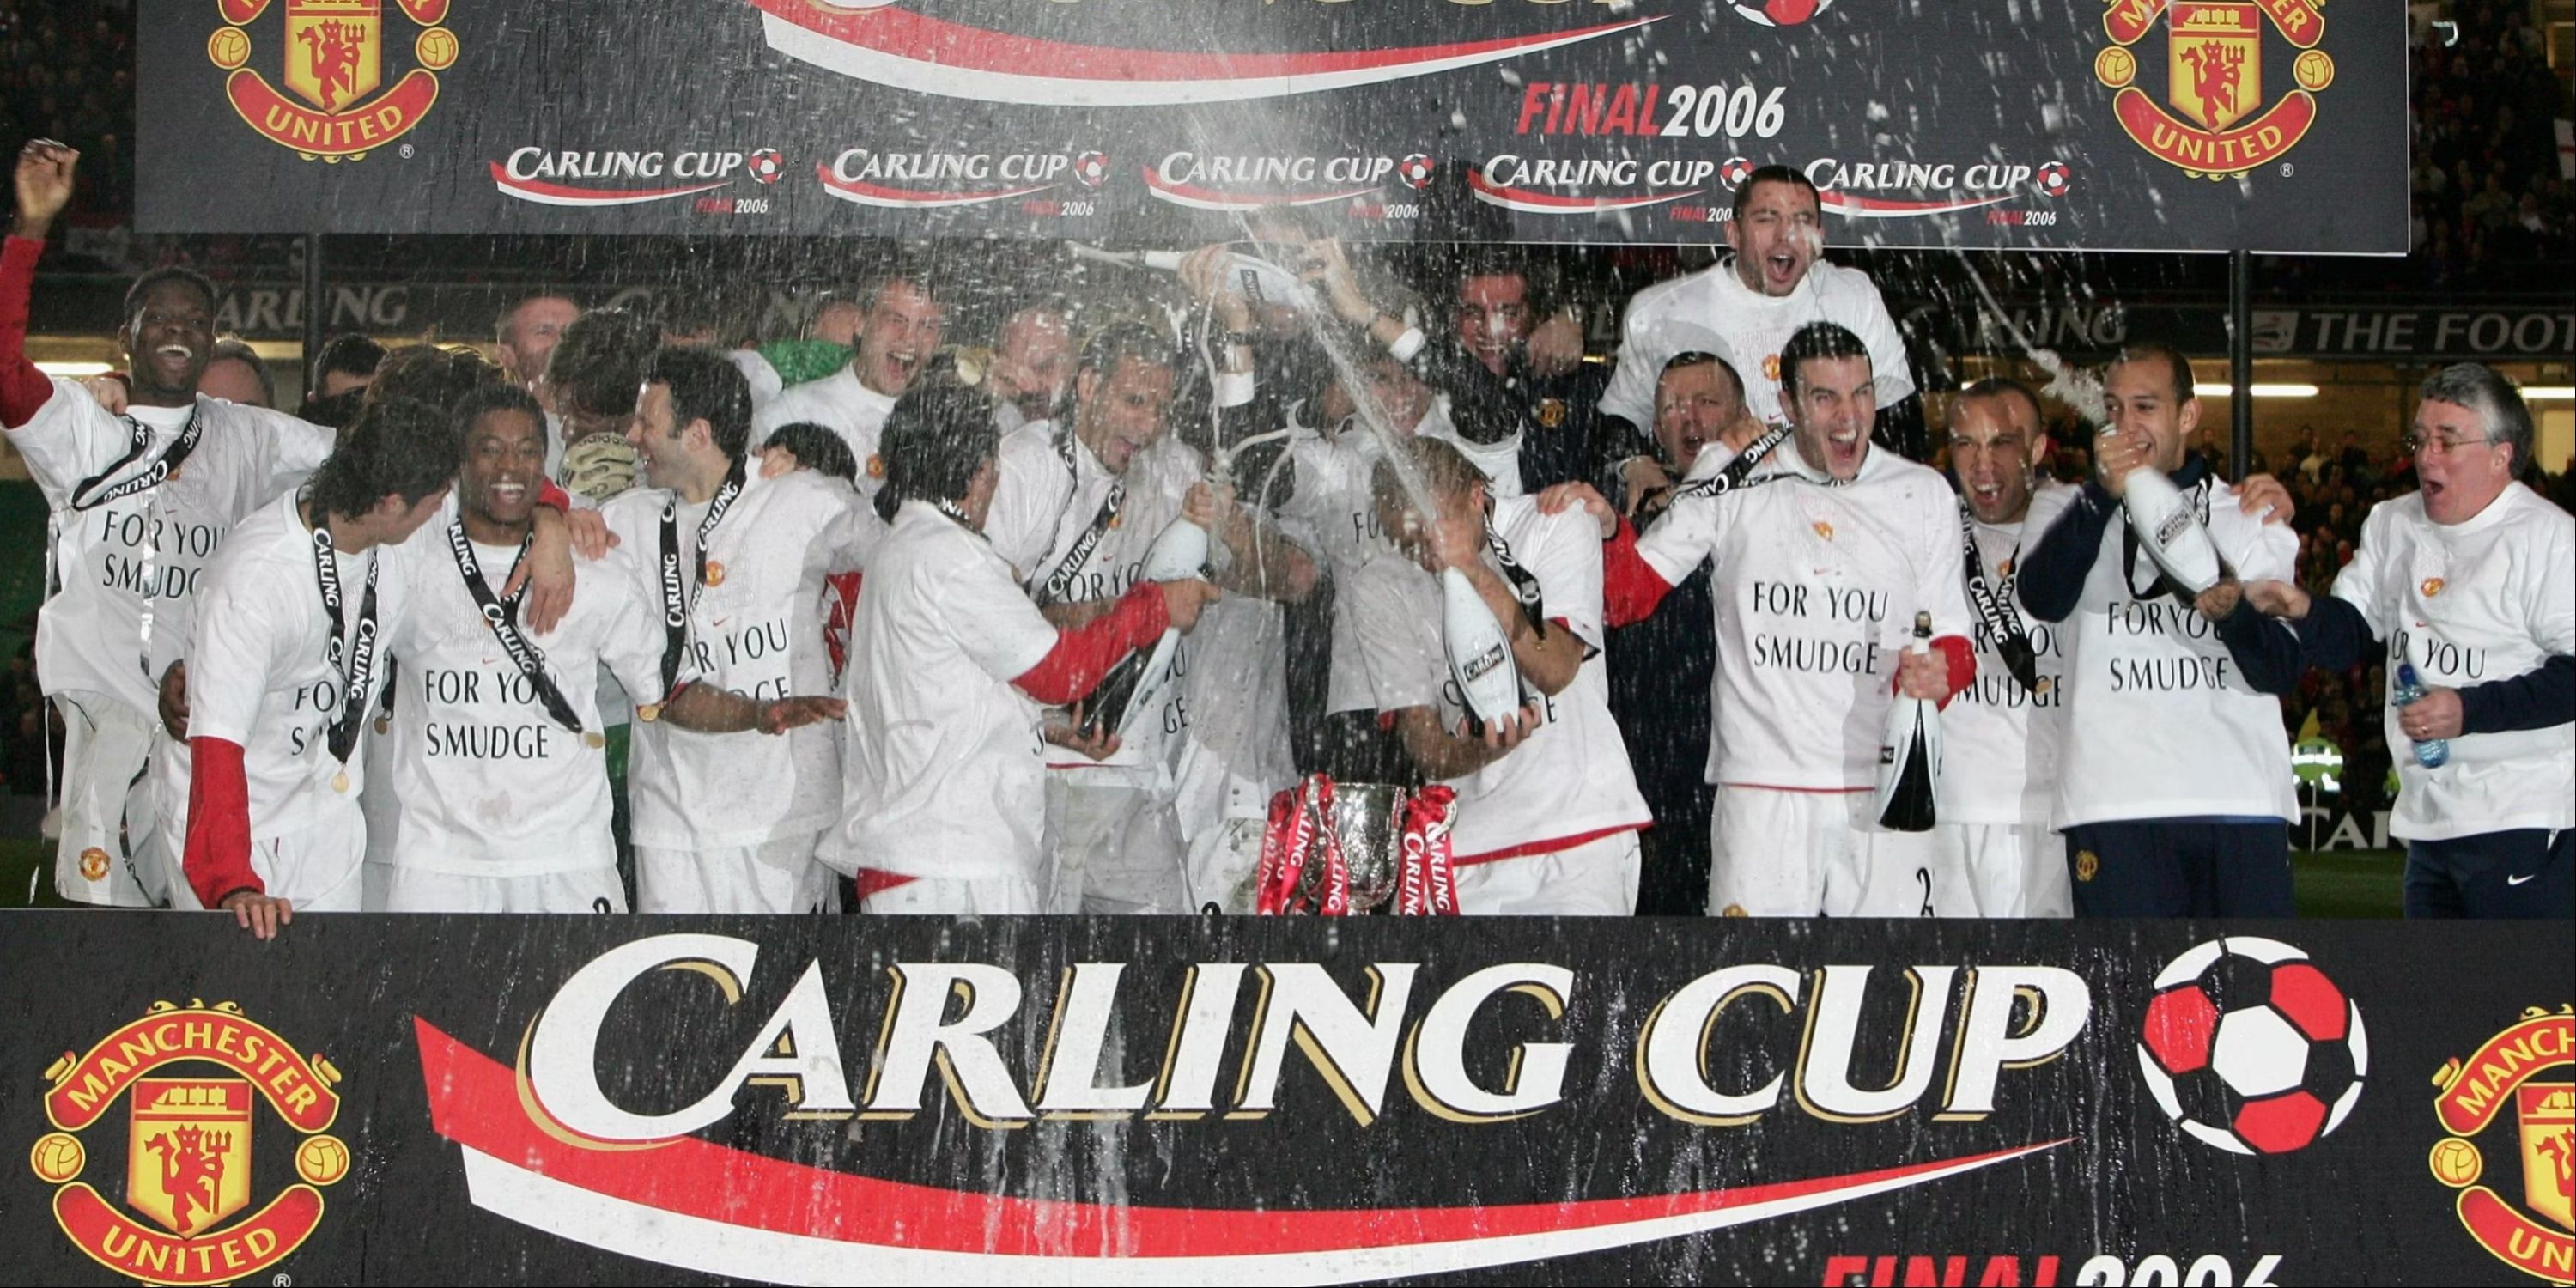 Manchester United players celebrating Carling Cup triumph